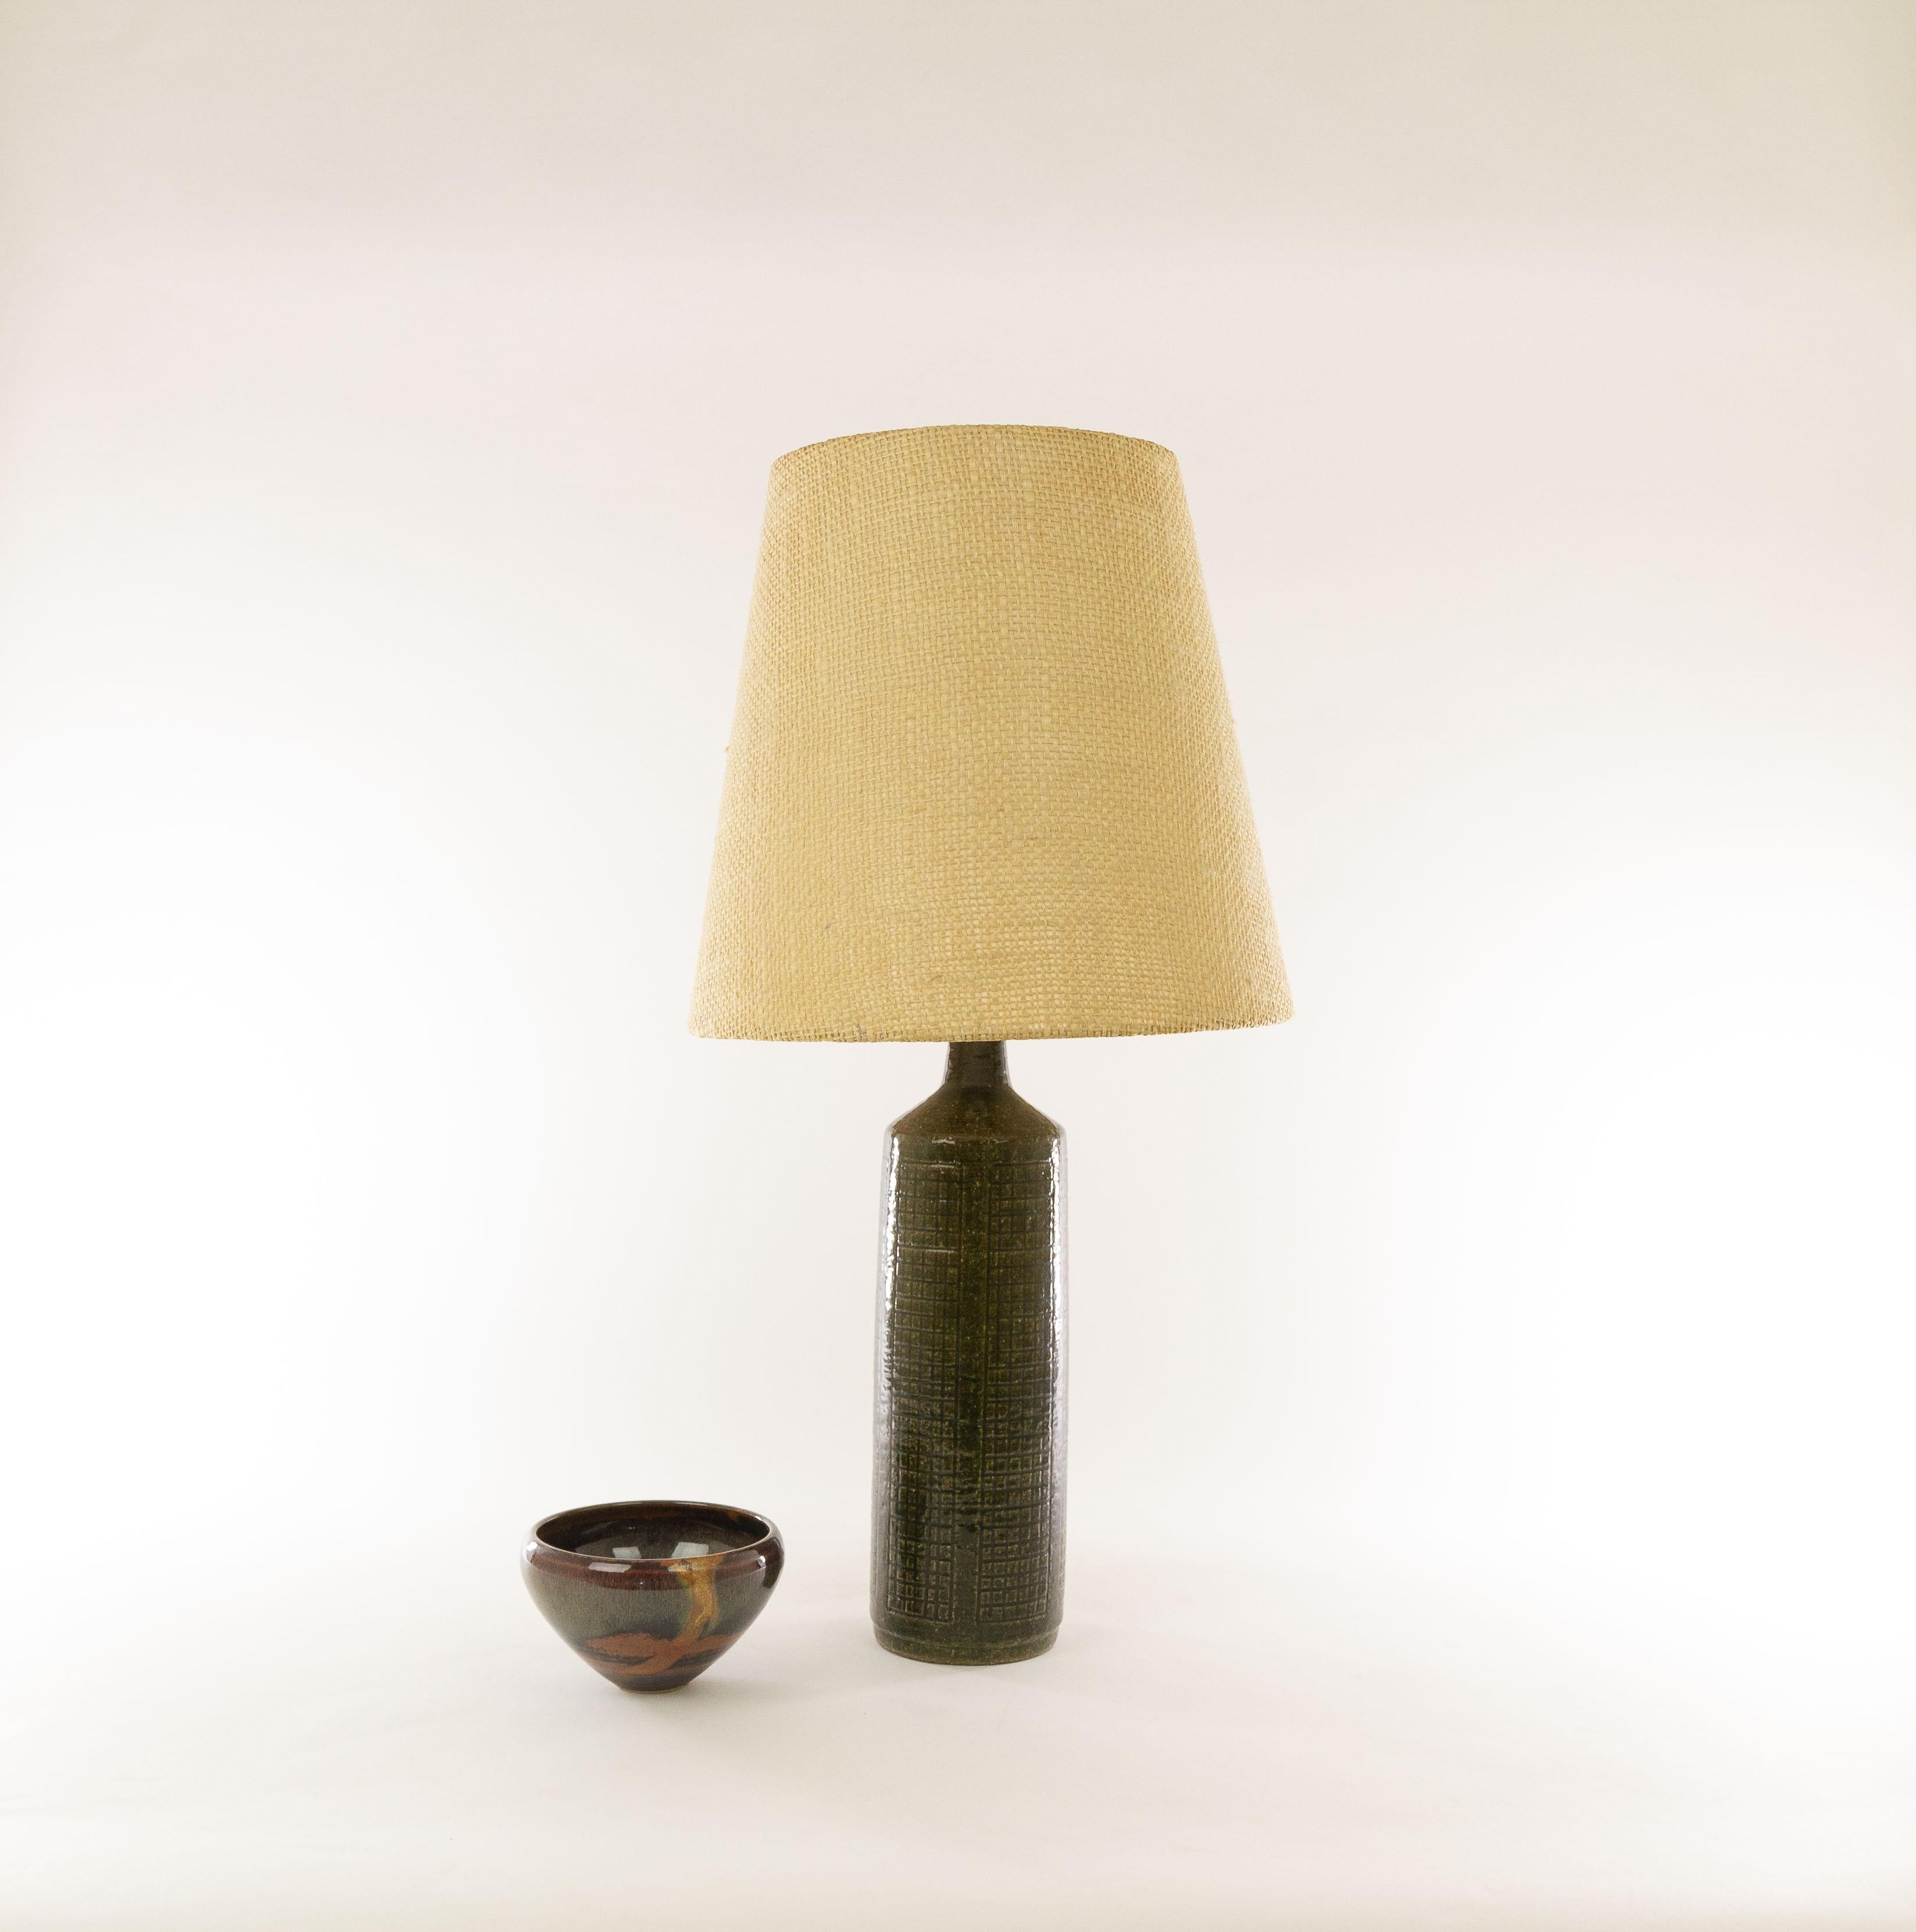 Model DL/27 table lamp made by Annelise and Per Linnemann-Schmidt for Palshus in the 1960s. The colour of one piece is seaweed. This specific DL/27 table lamp is an exceptional large version. The normal height of this model is 33 cm / 13 inch,